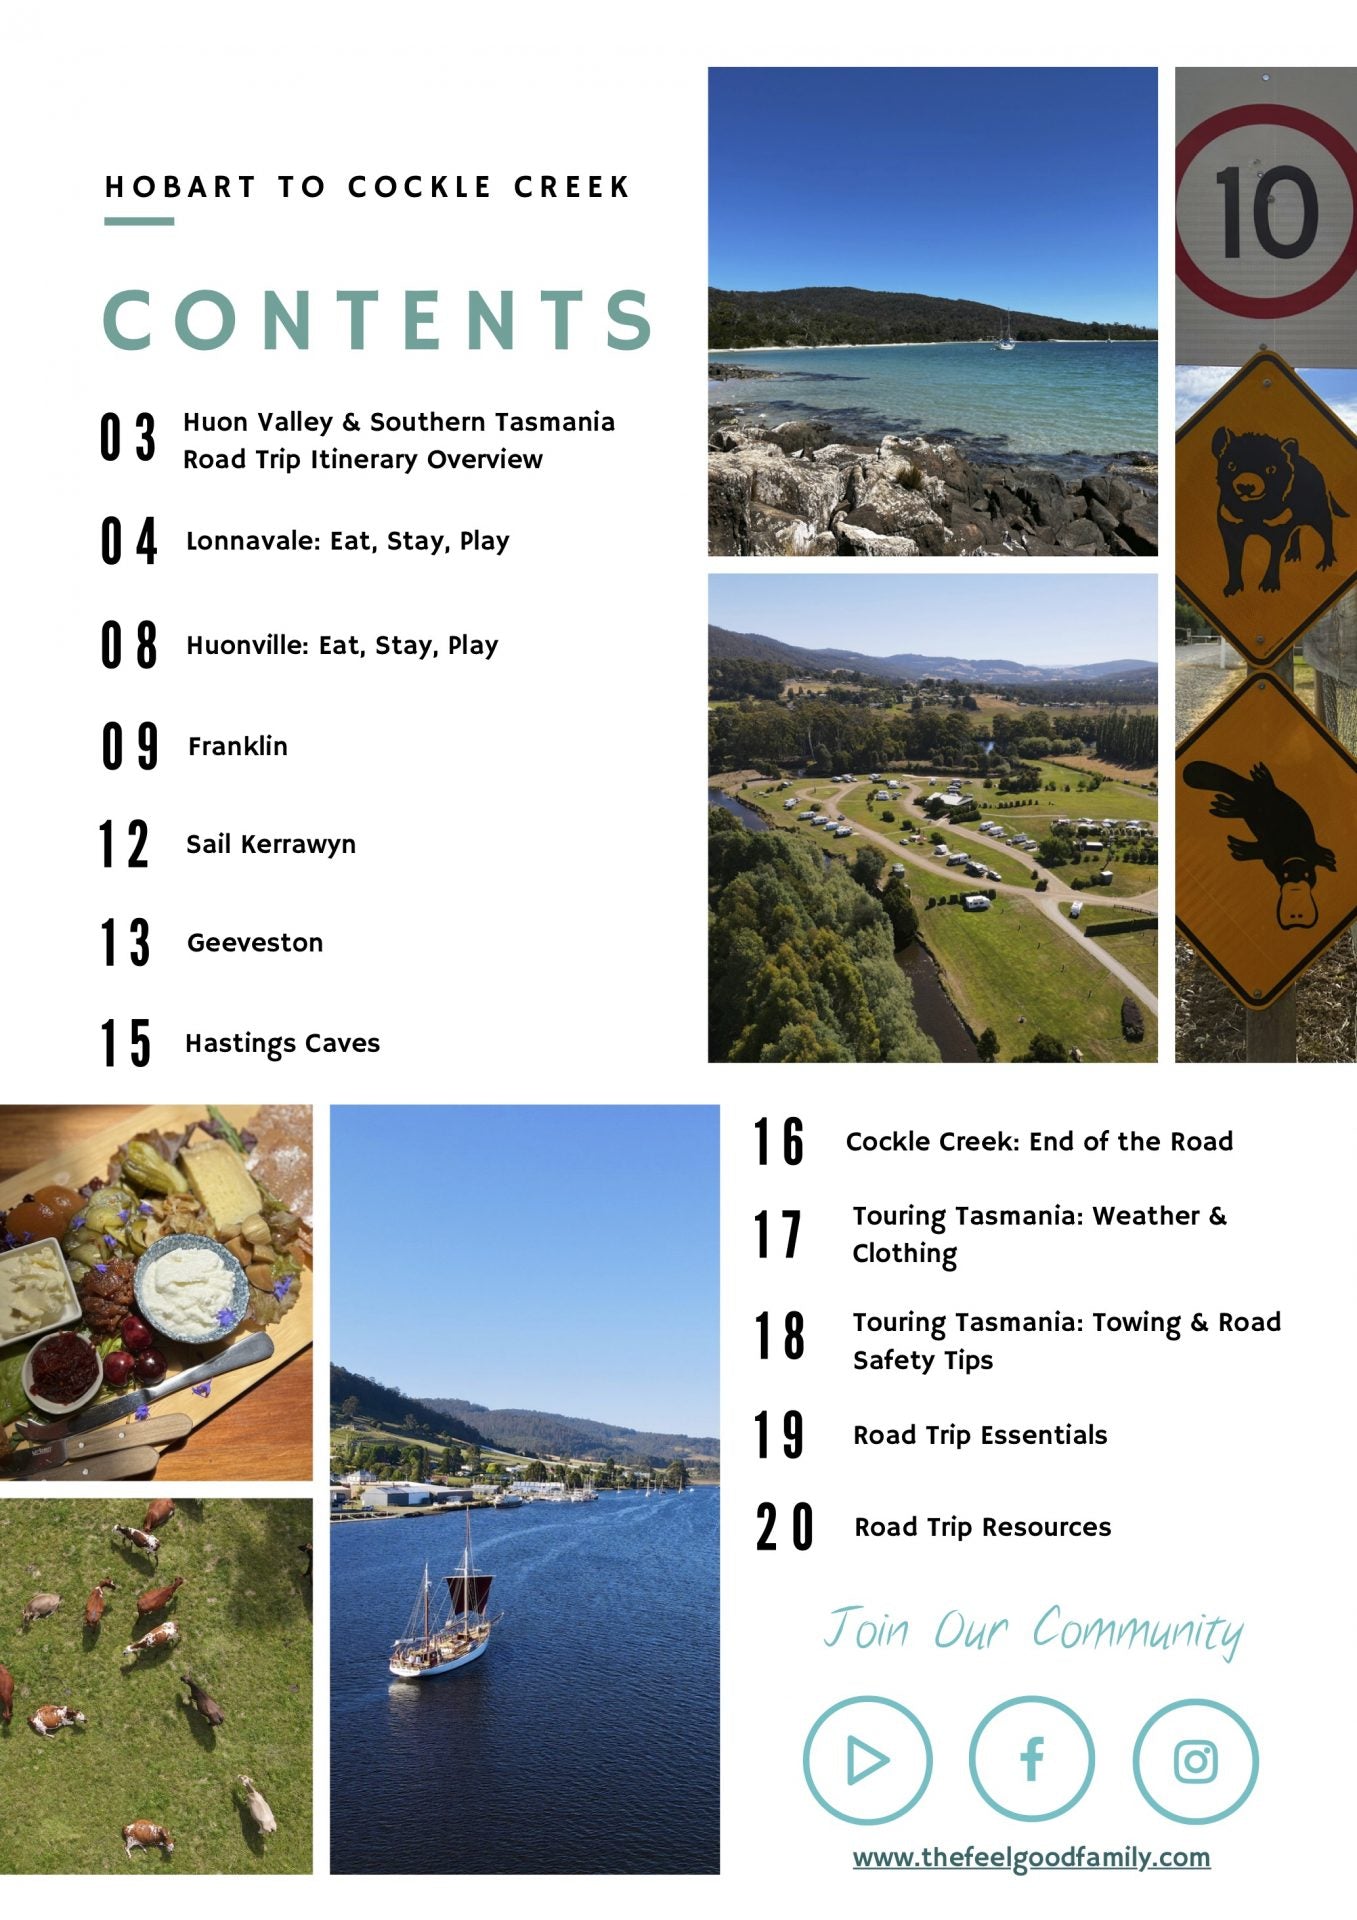 Hobart to Huon Valley - The Ultimate Road Trip Guide